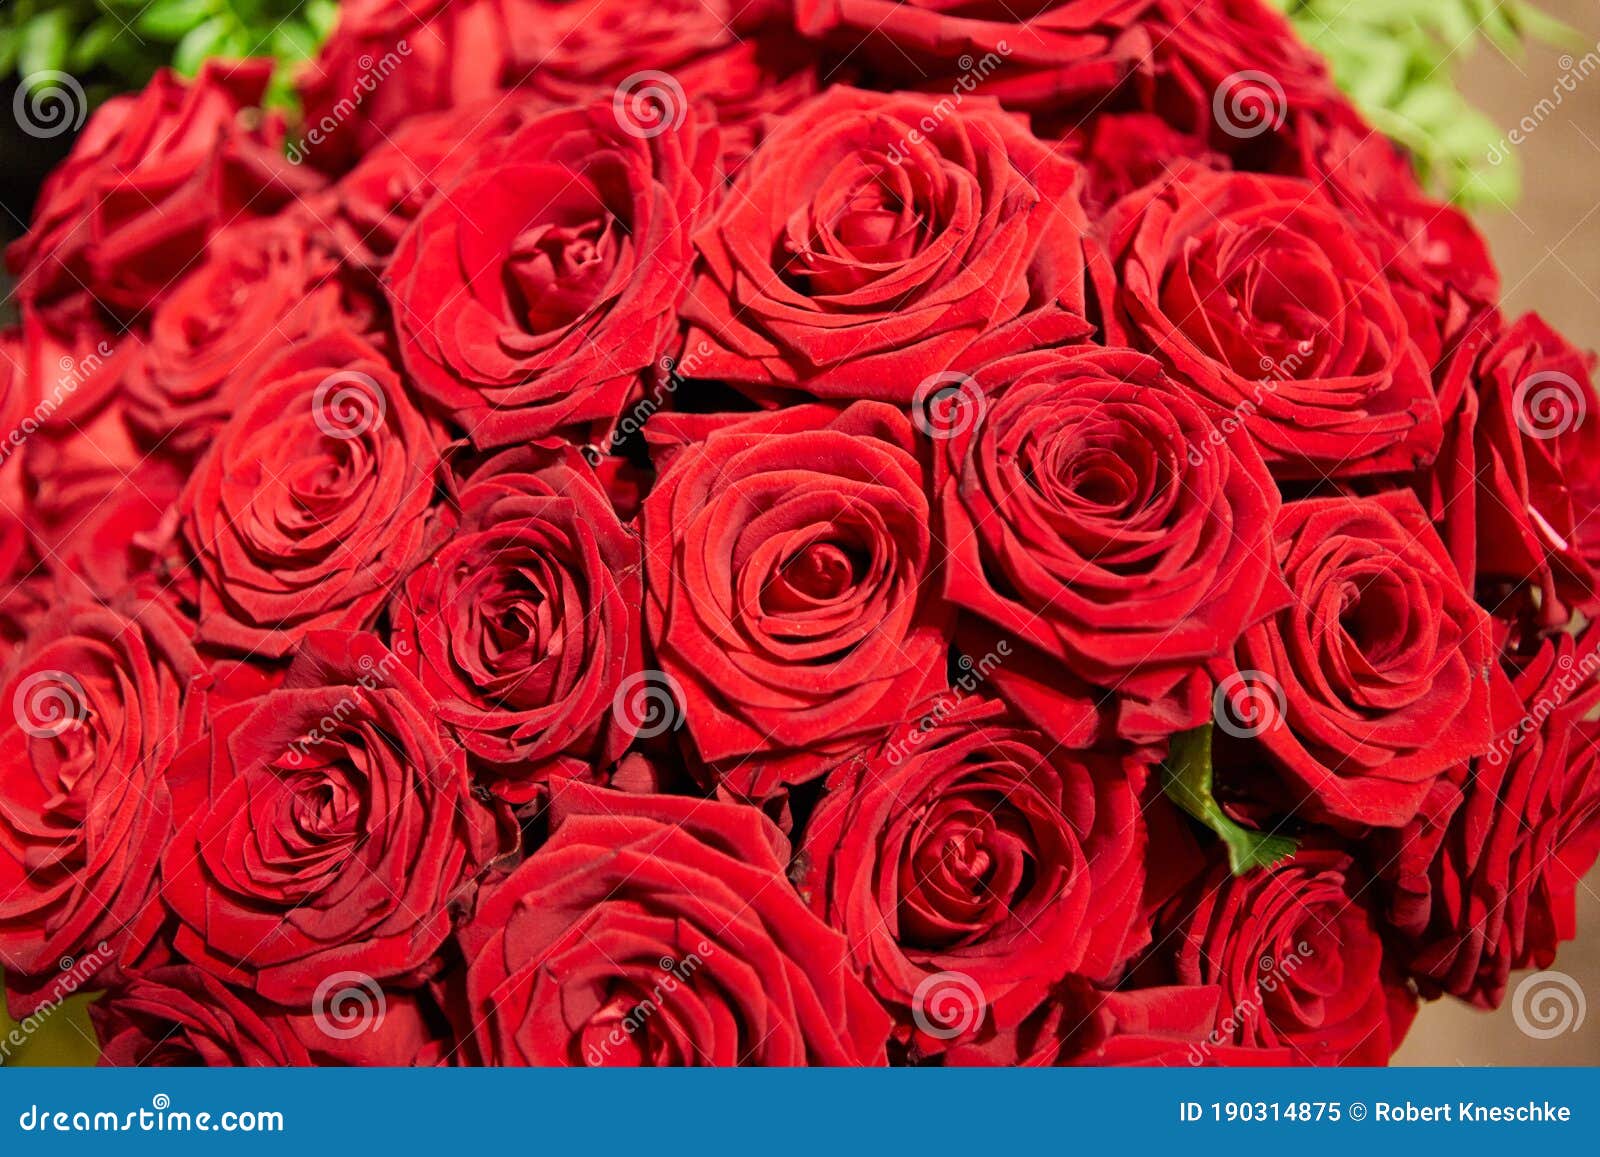 Bouquet of Red Roses for Valentine`s Day Stock Image - Image of load ...